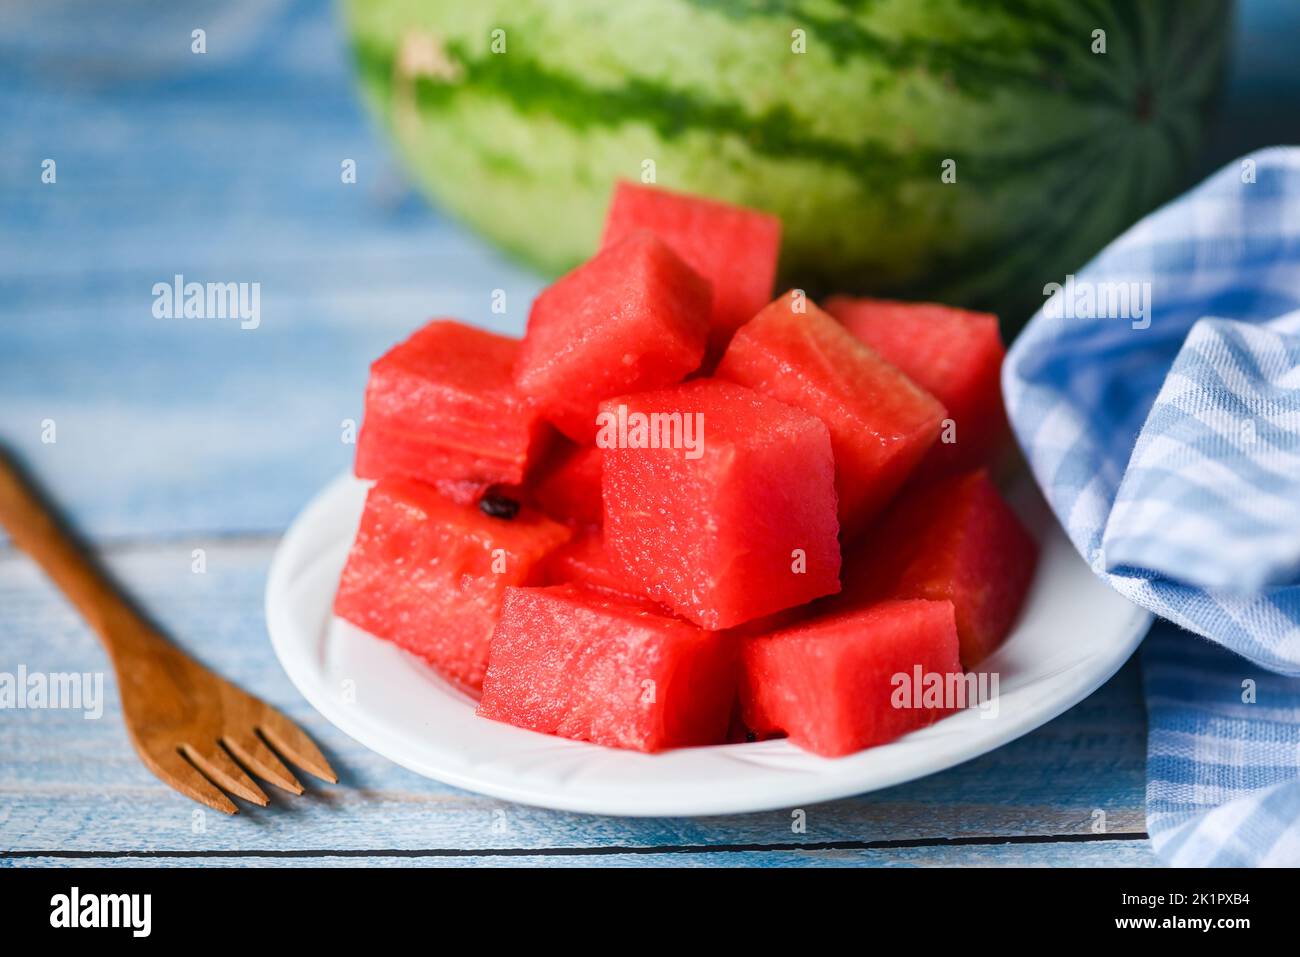 Red watermelon slice on white plate, sweet watermelon slices pieces fresh watermelon tropical summer fruit Stock Photo